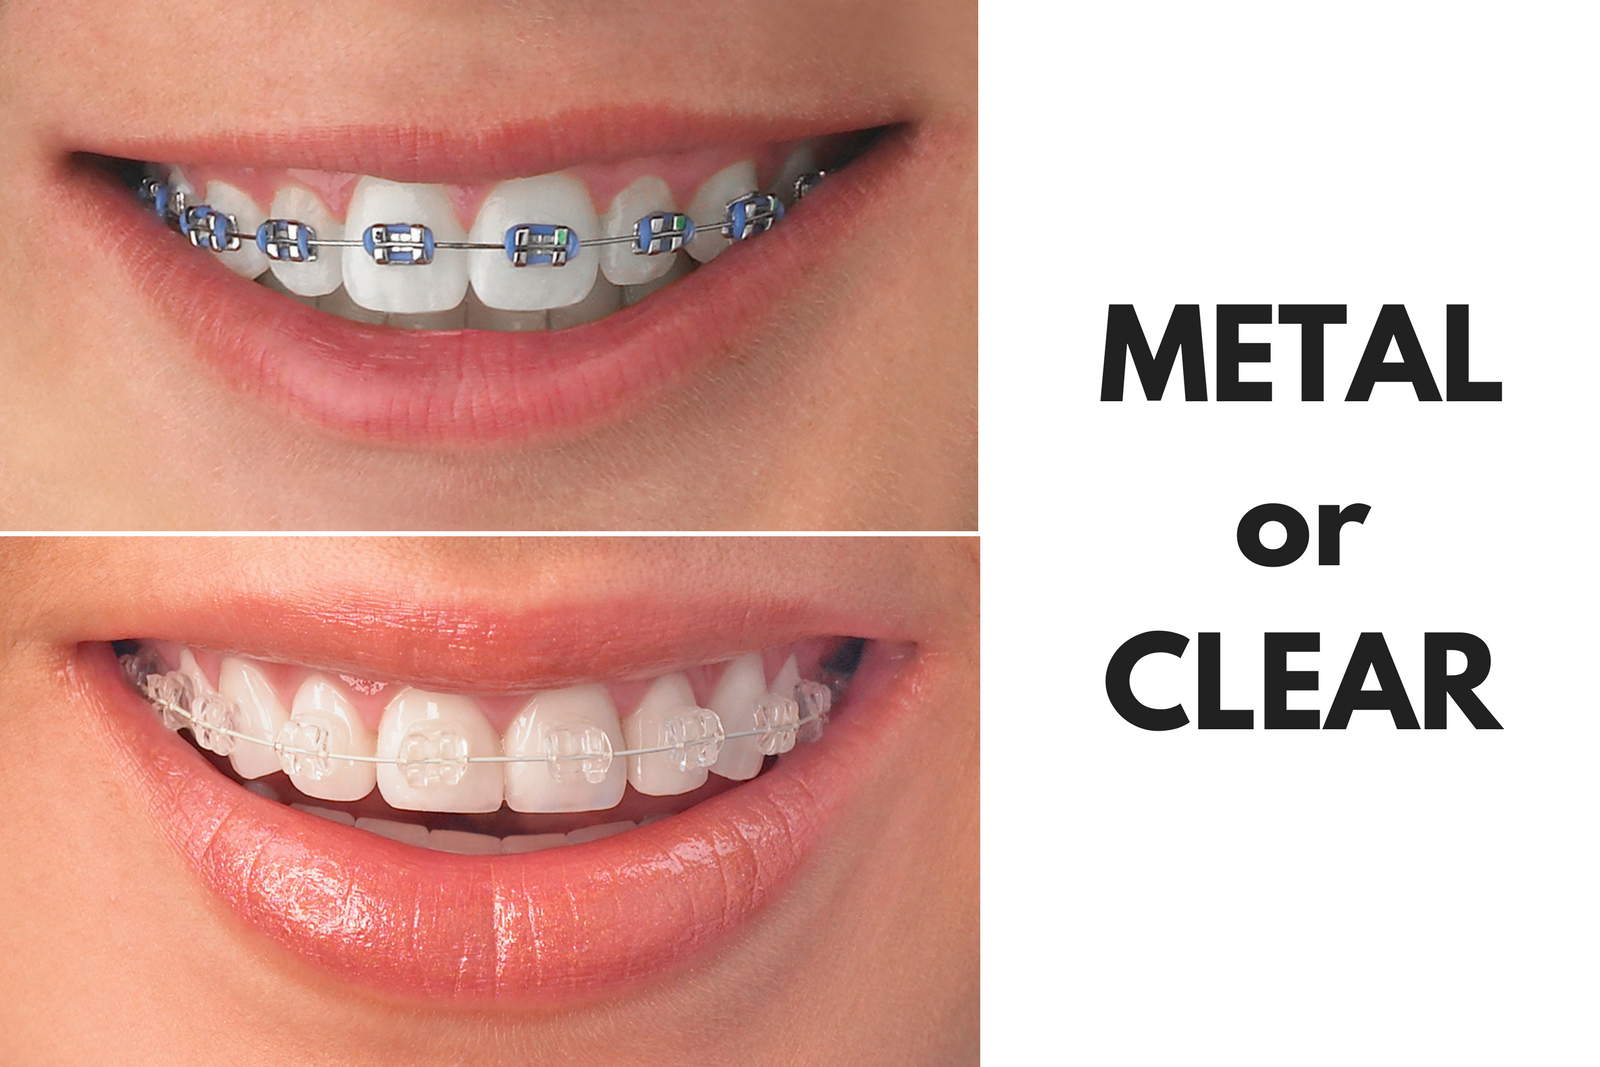 Ask Your Beaumont, Galveston and Port Arthur Dentist: Should I Get Metal or Clear Braces?